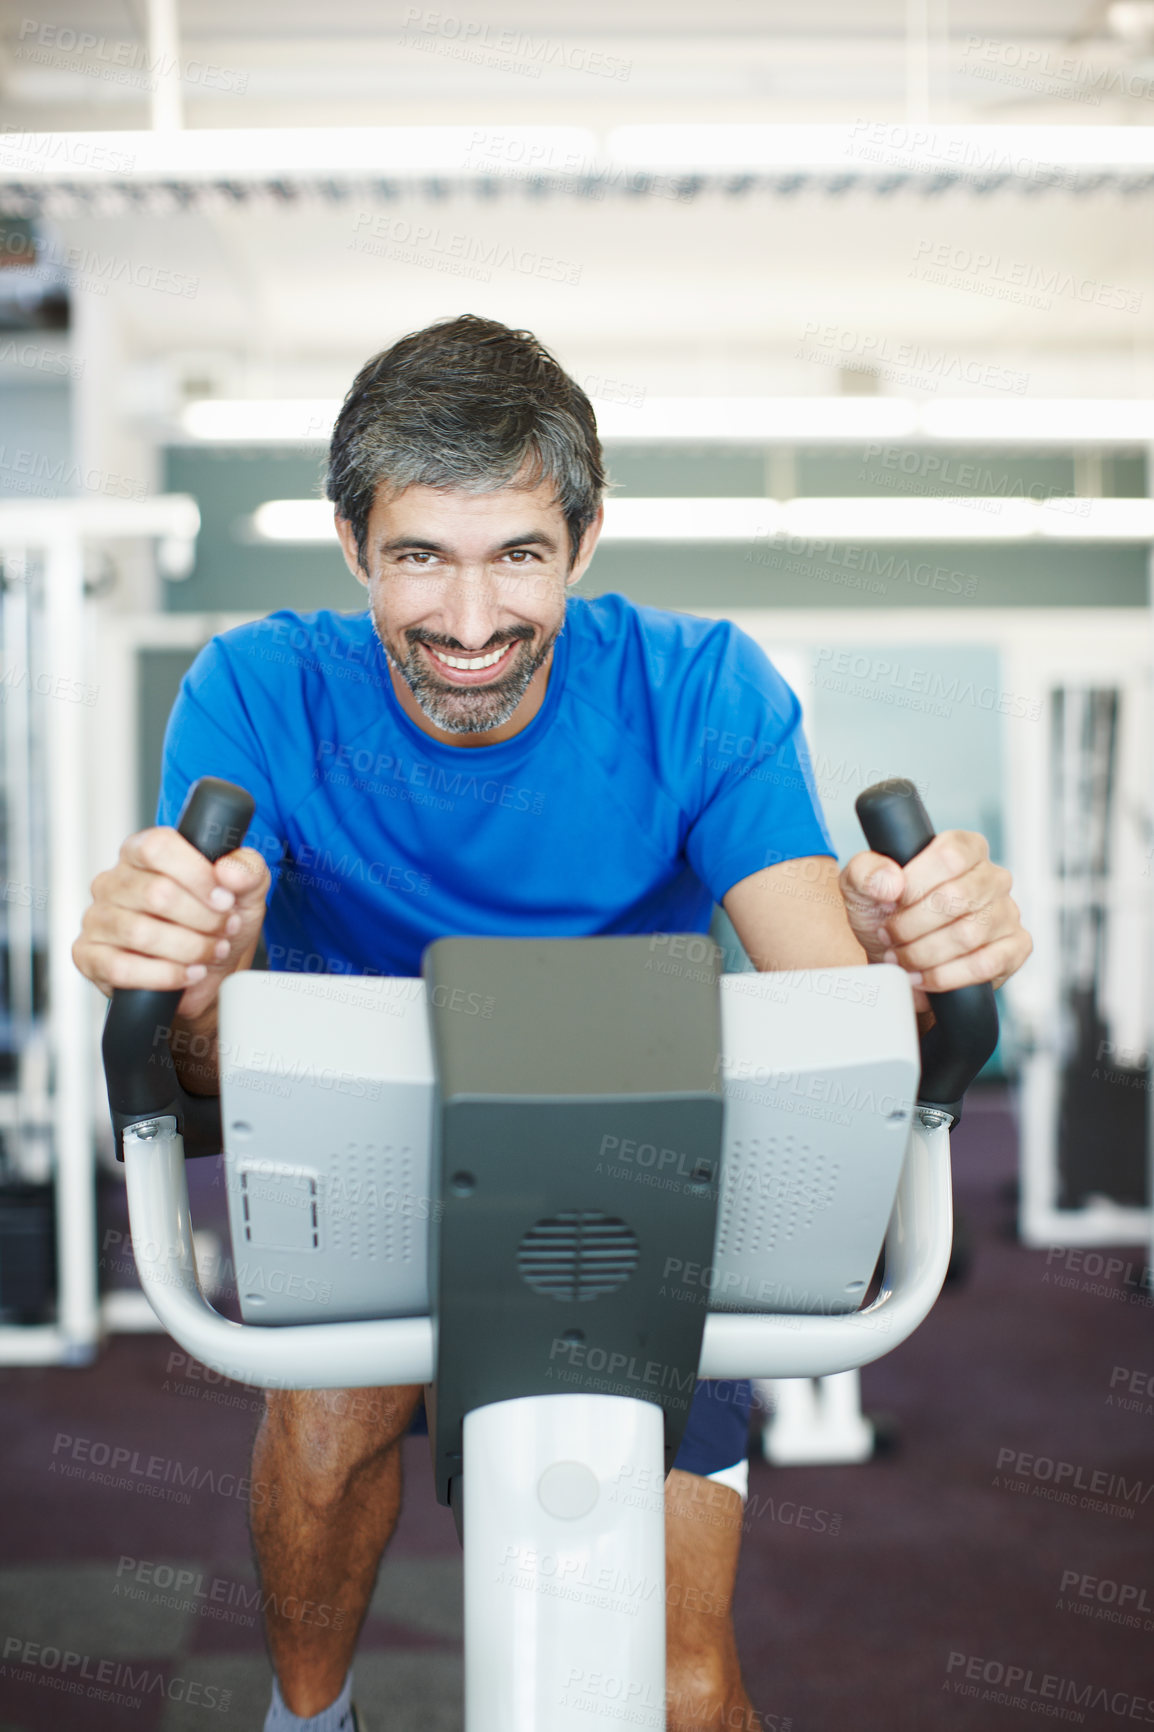 Buy stock photo Cropped portrait of a handsome man using an exercise bike in the gym